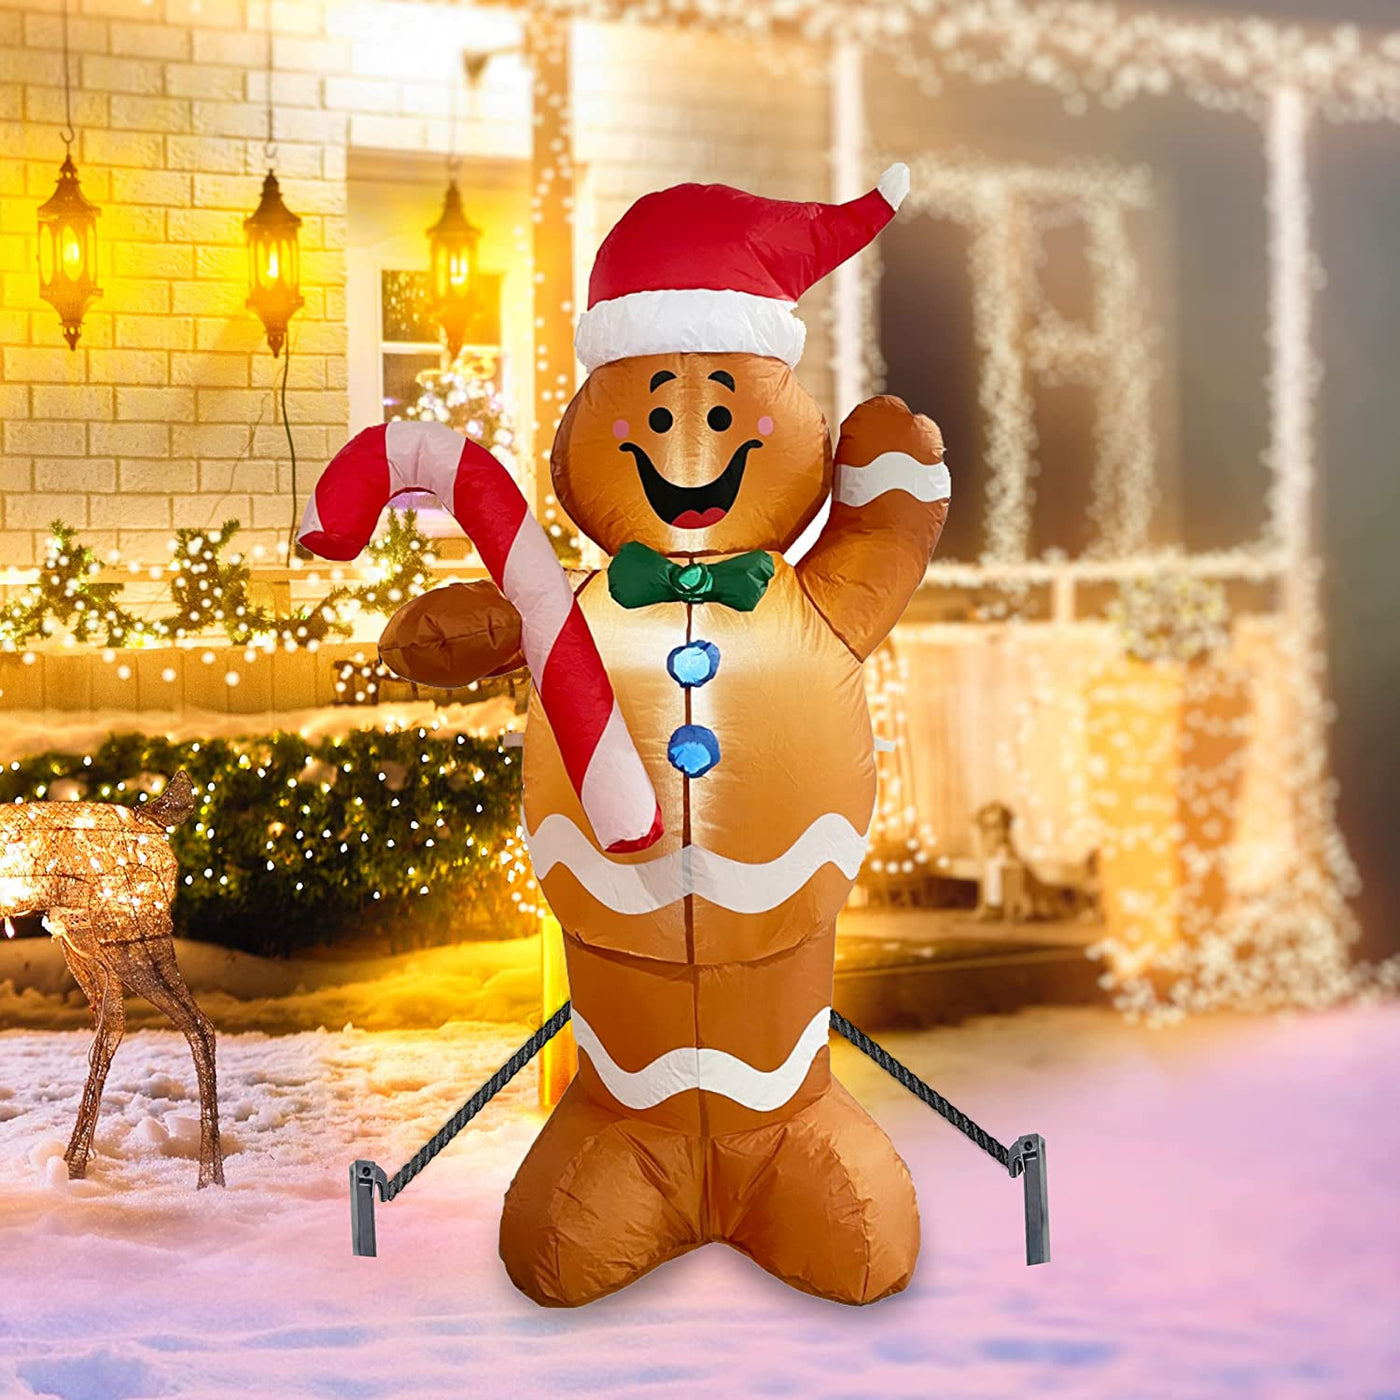 Christmas Inflatable Outdoor Gingerbread Man with Built in LED Lights. Blow-up Yard Christmas Decoration for Party, Indoor, Outdoor, Yard, Garden, Lawn - 5ft Tall by 4E's Novelty